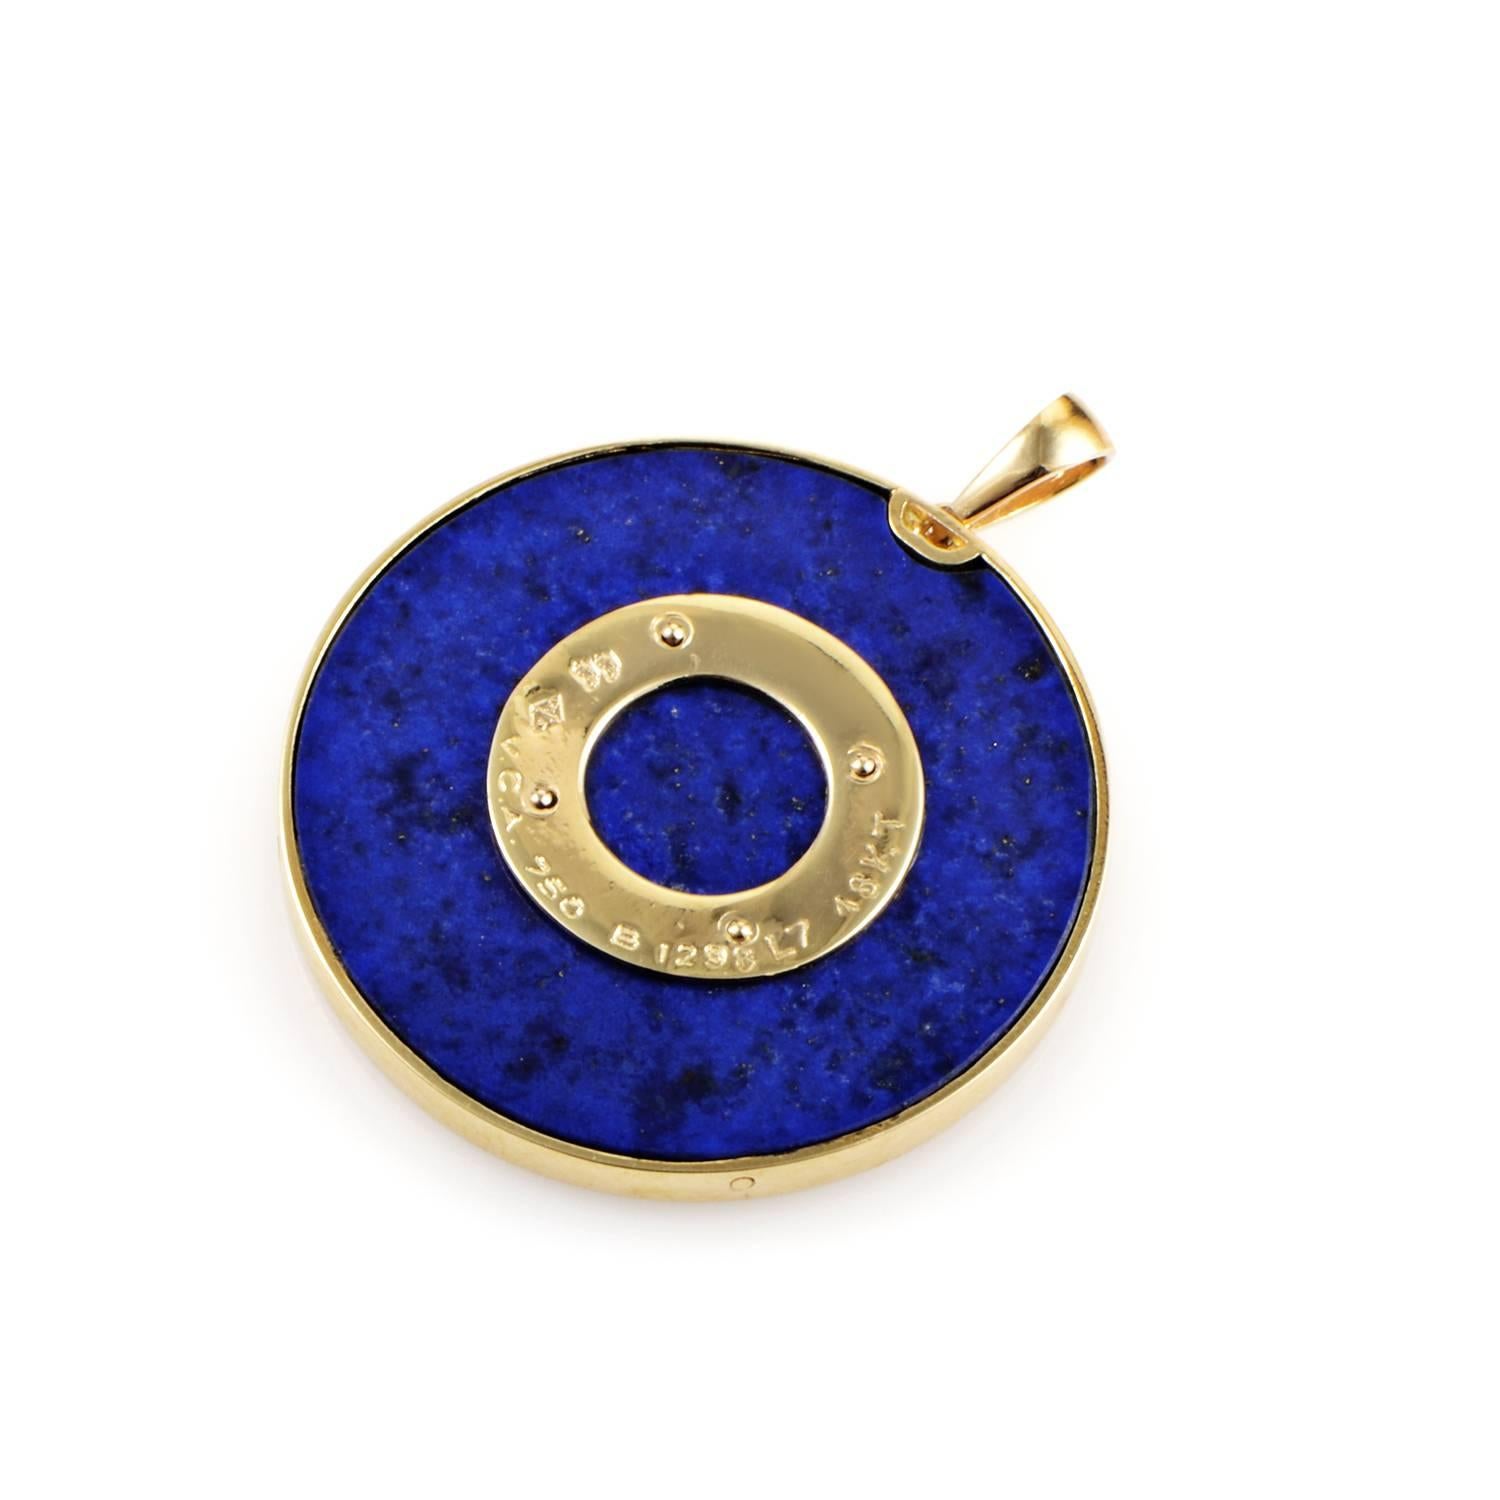 With a four-leafed clover in prestigious 18K yellow gold against a splendid backdrop of magnificently nuanced lapis lazuli stone, this outstanding pendant from Van Cleef & Arpels also boasts a subtle engraving along its edges and offers a pleasant